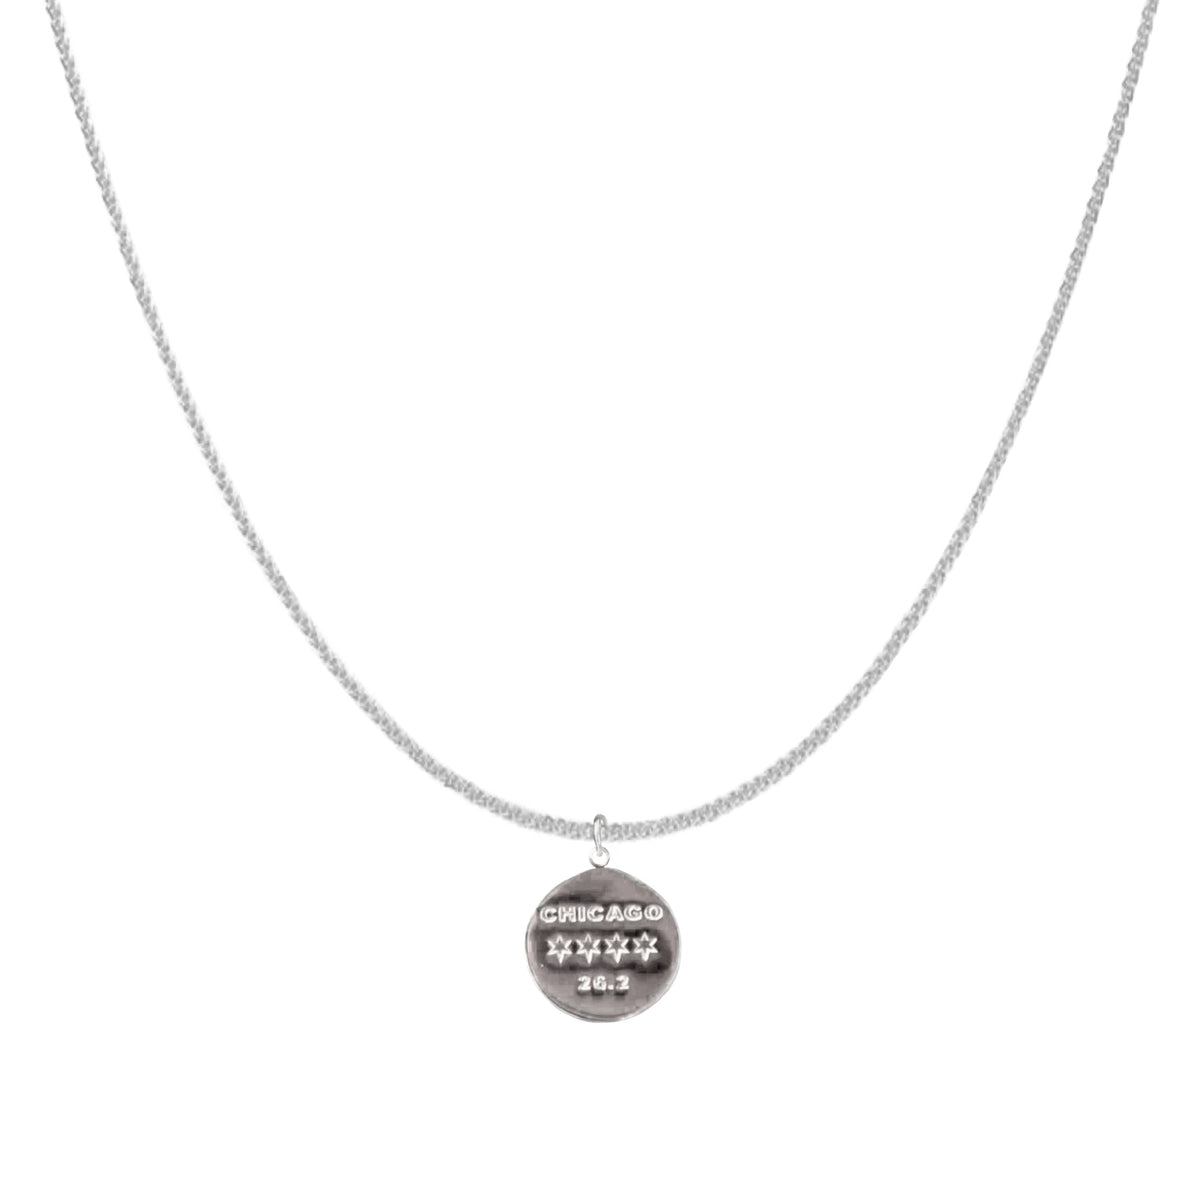 Chicago 26.2 Necklace